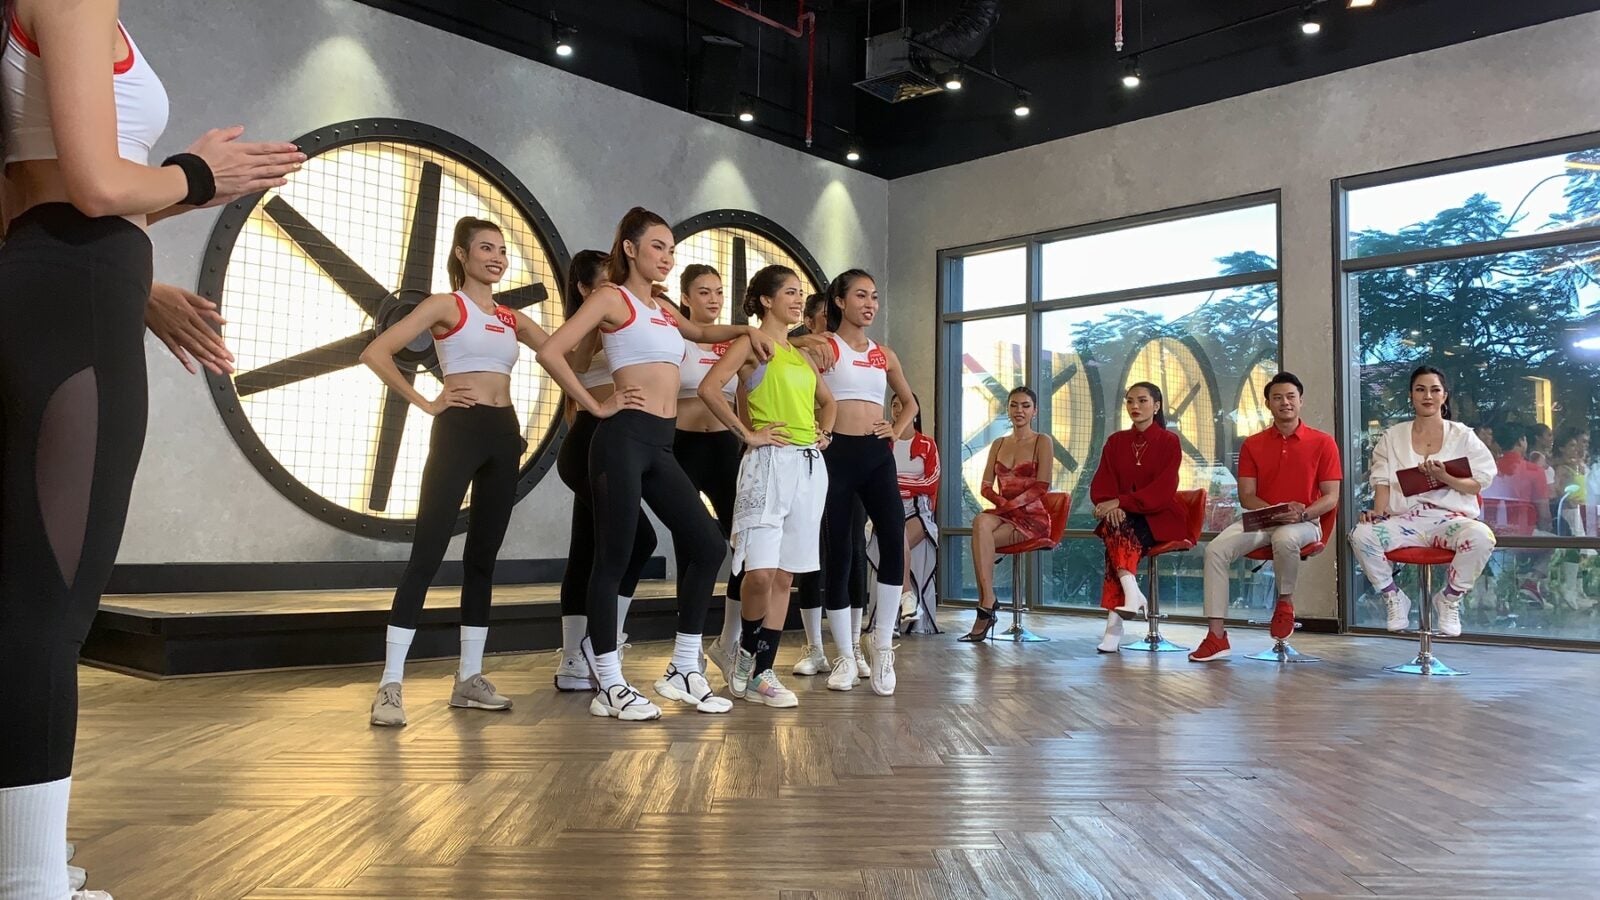 A group of fitness enthusiasts stand posing together wearing white tank tops and black pants while one woman stands in the middle wearing a yellow tank top and white pants. Four non-participants are sitting at the side while watching intently.